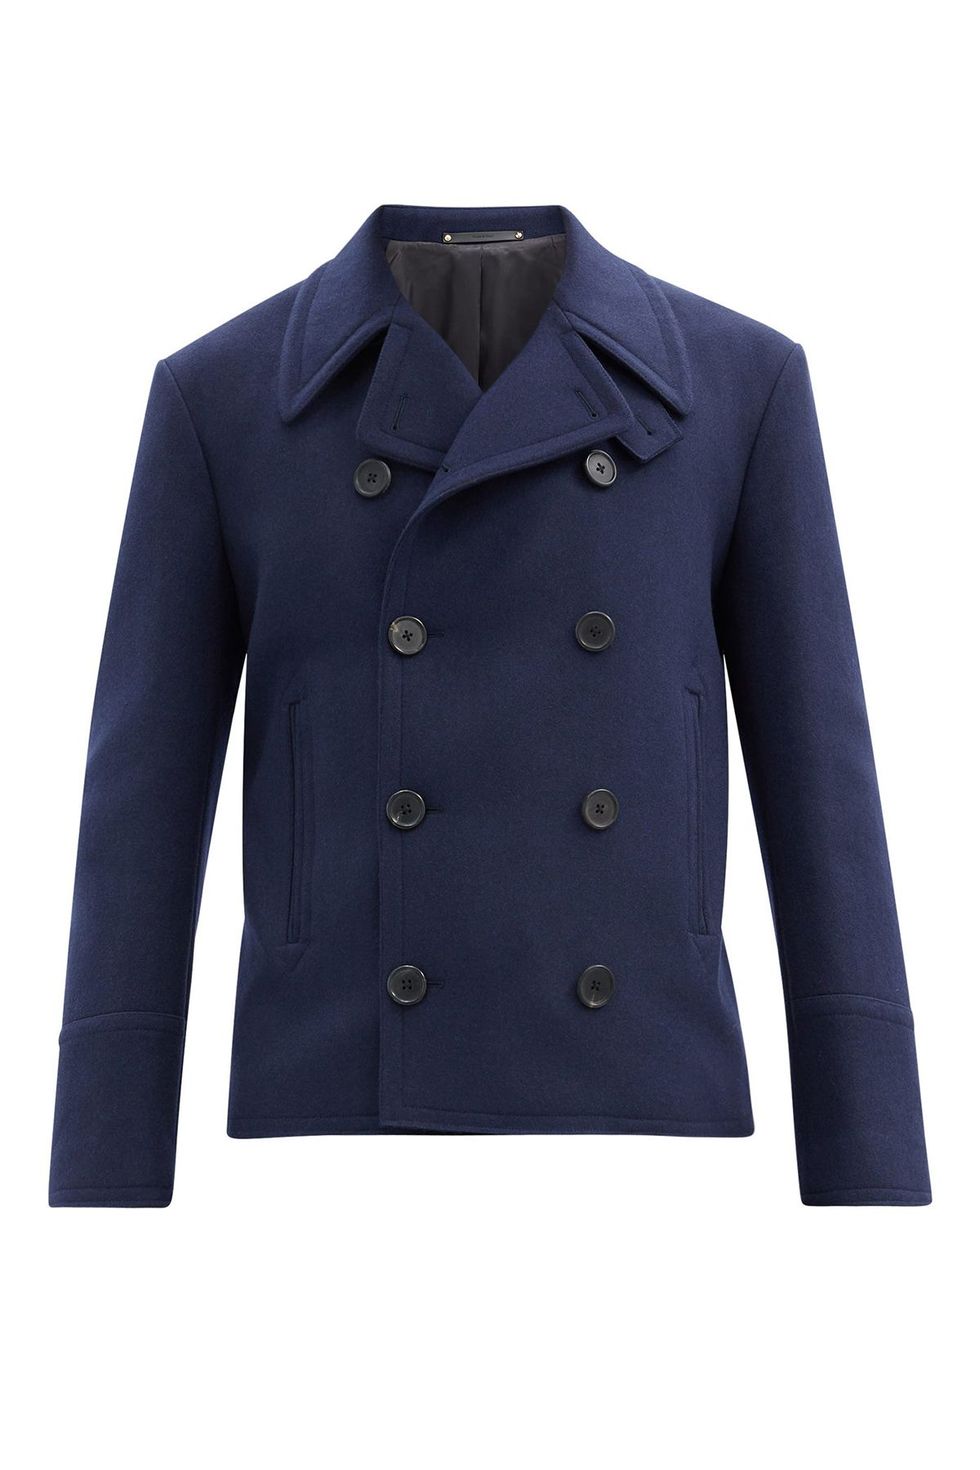 15 Stylish Peacoats for Men 2021 - Best Men's Peacoats to Complete Any ...